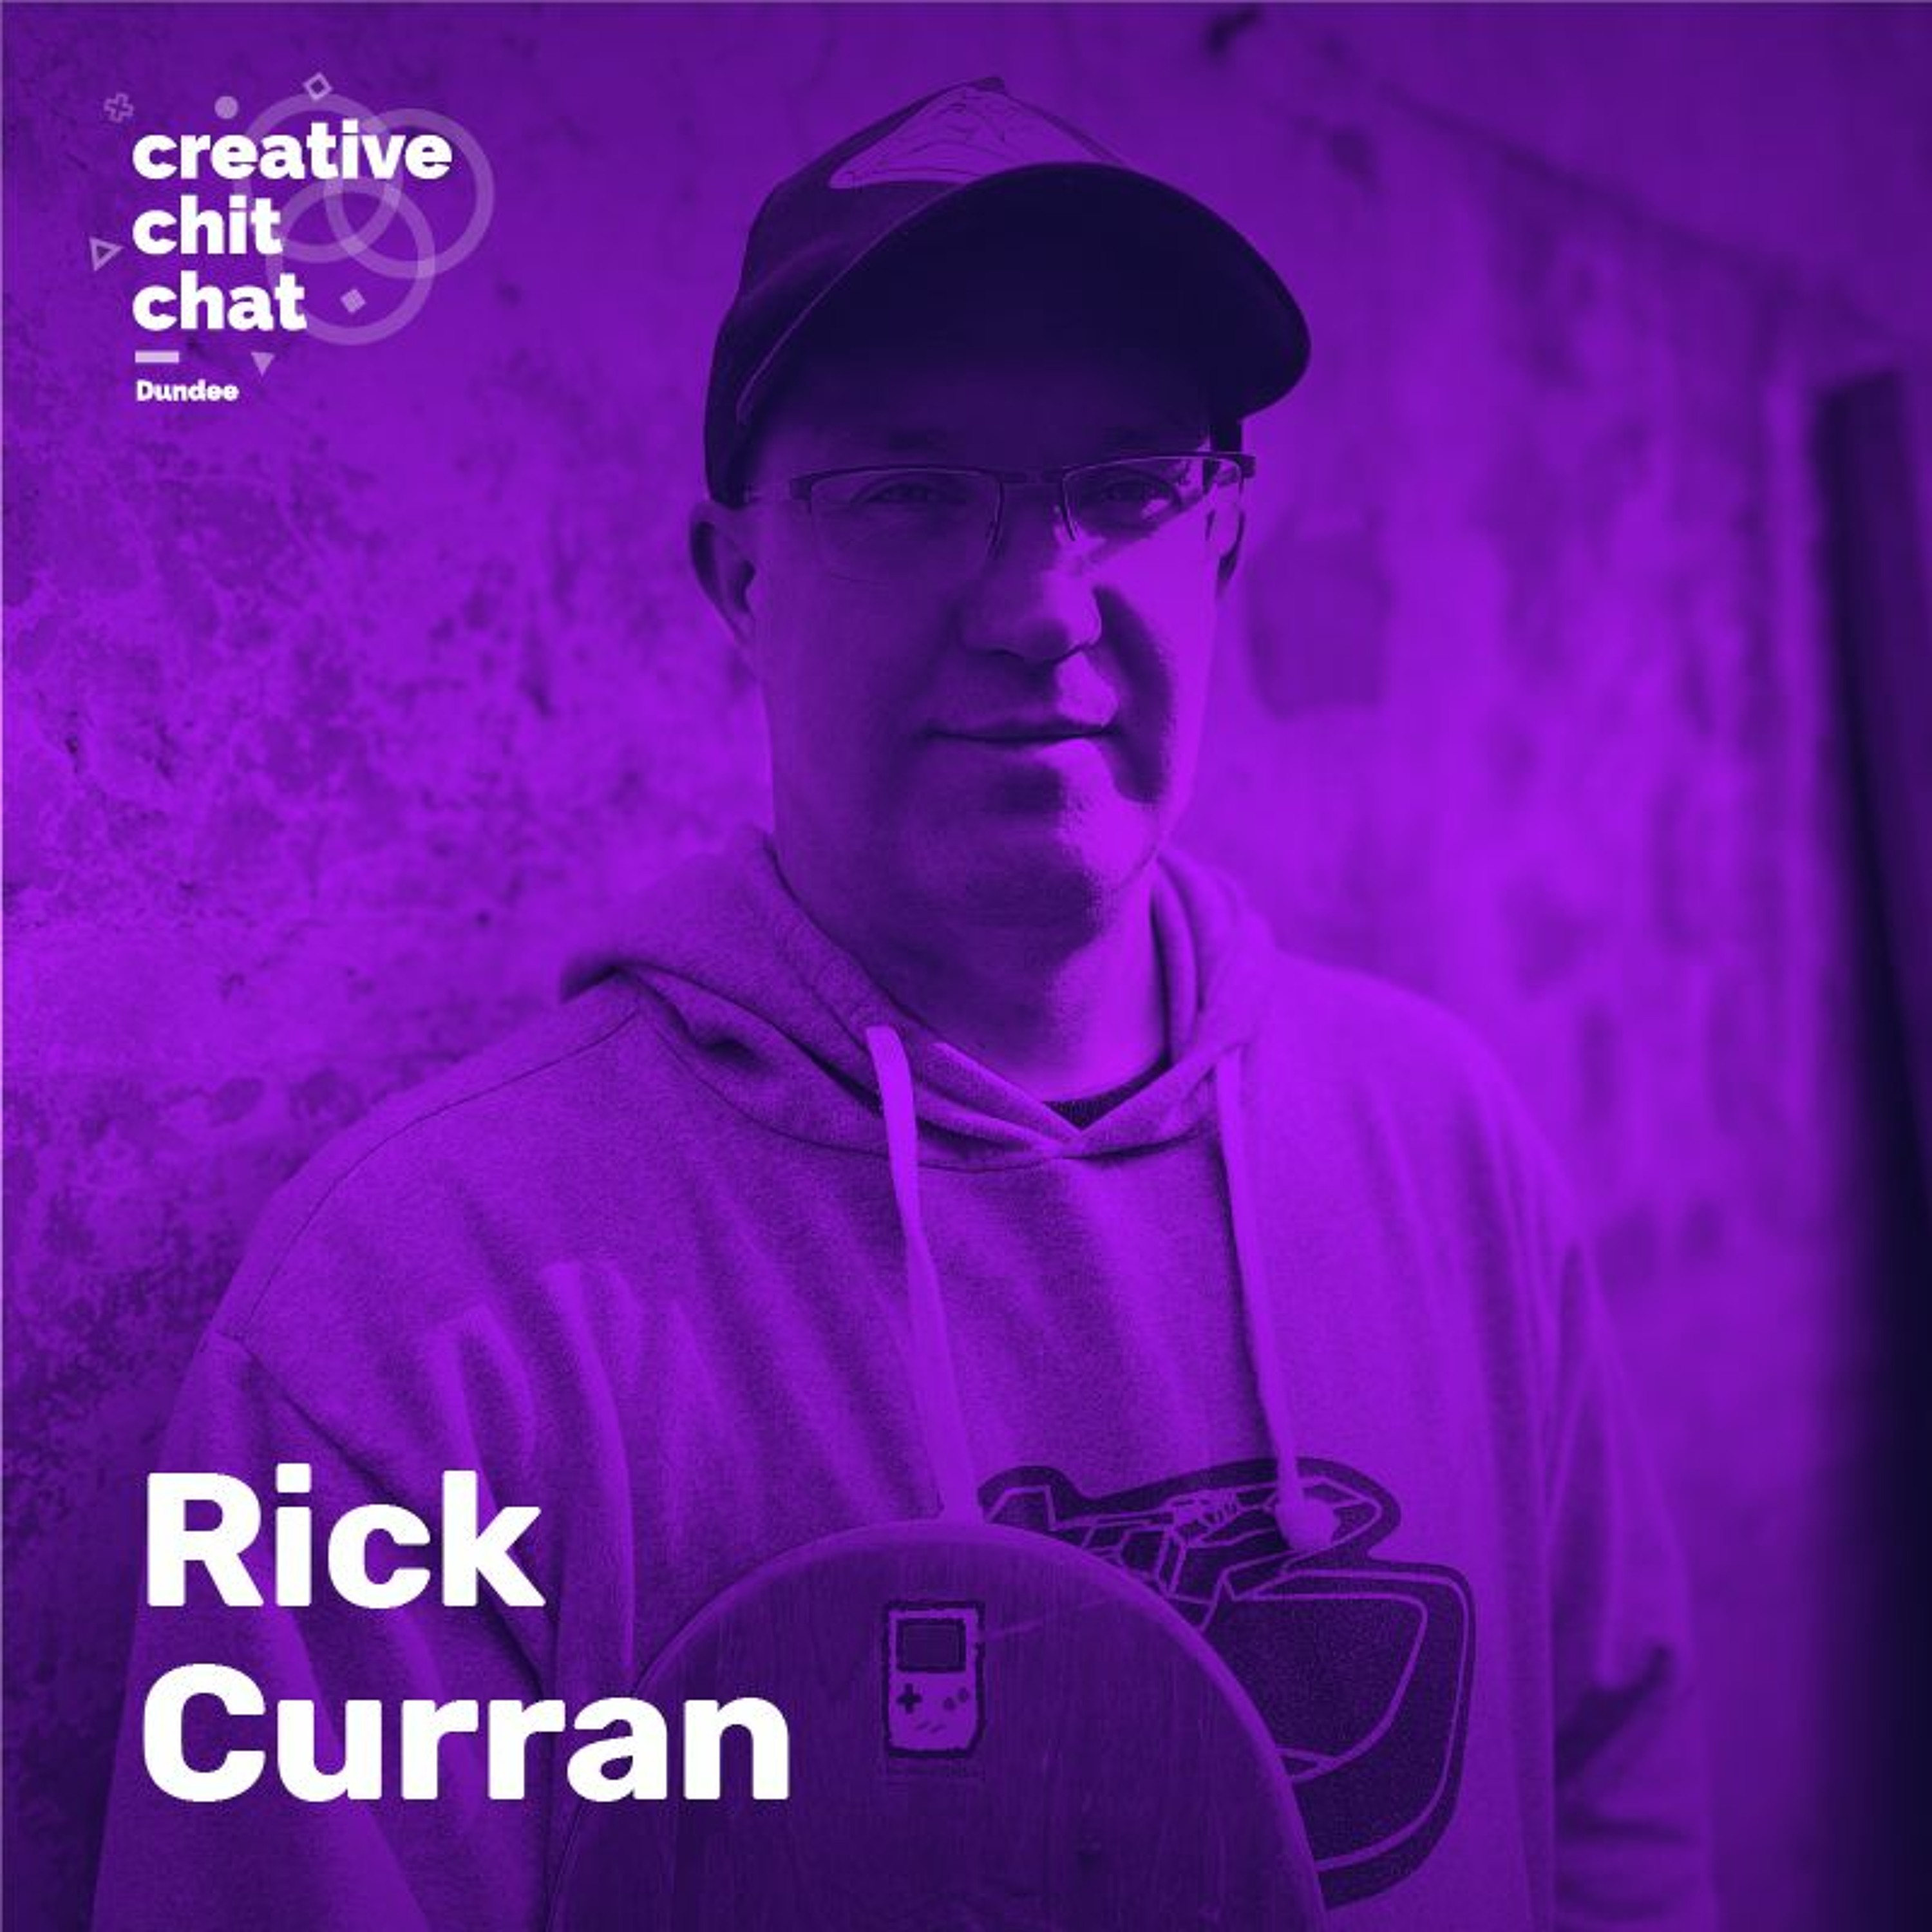 Rick Curran - Dundee's skate history through the lens of a web developer